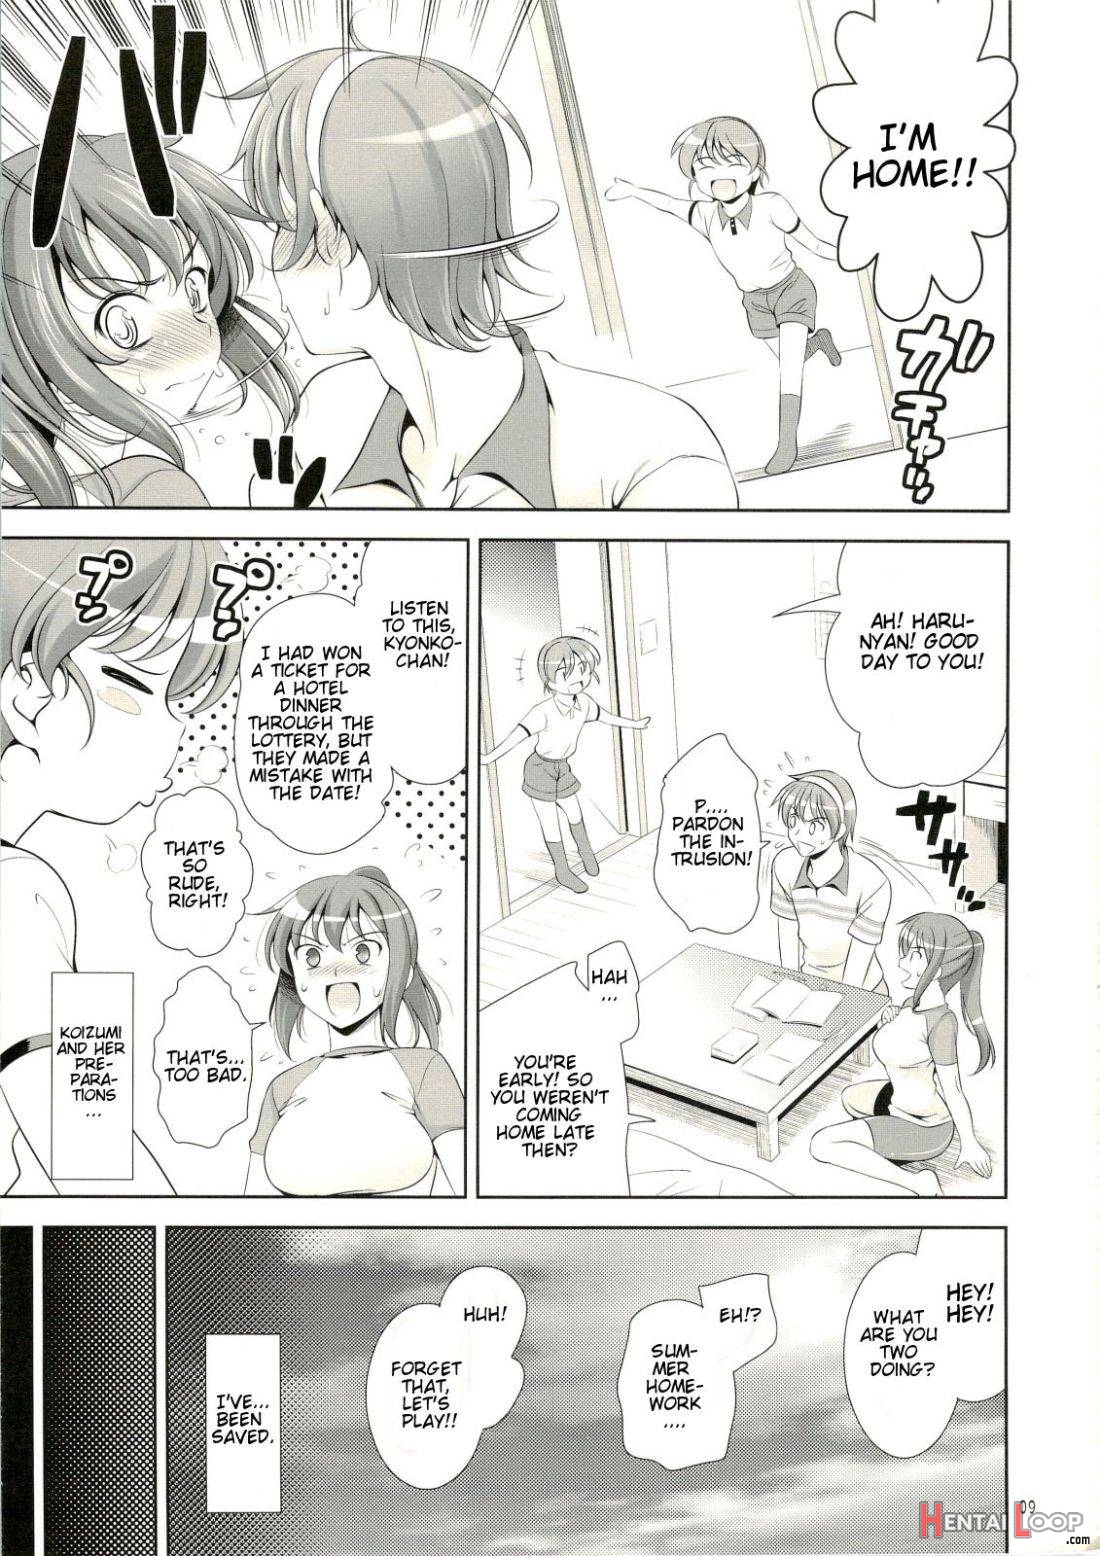 Manatsu no Yo no Yume no Mata Yume no Mata Yume page 6